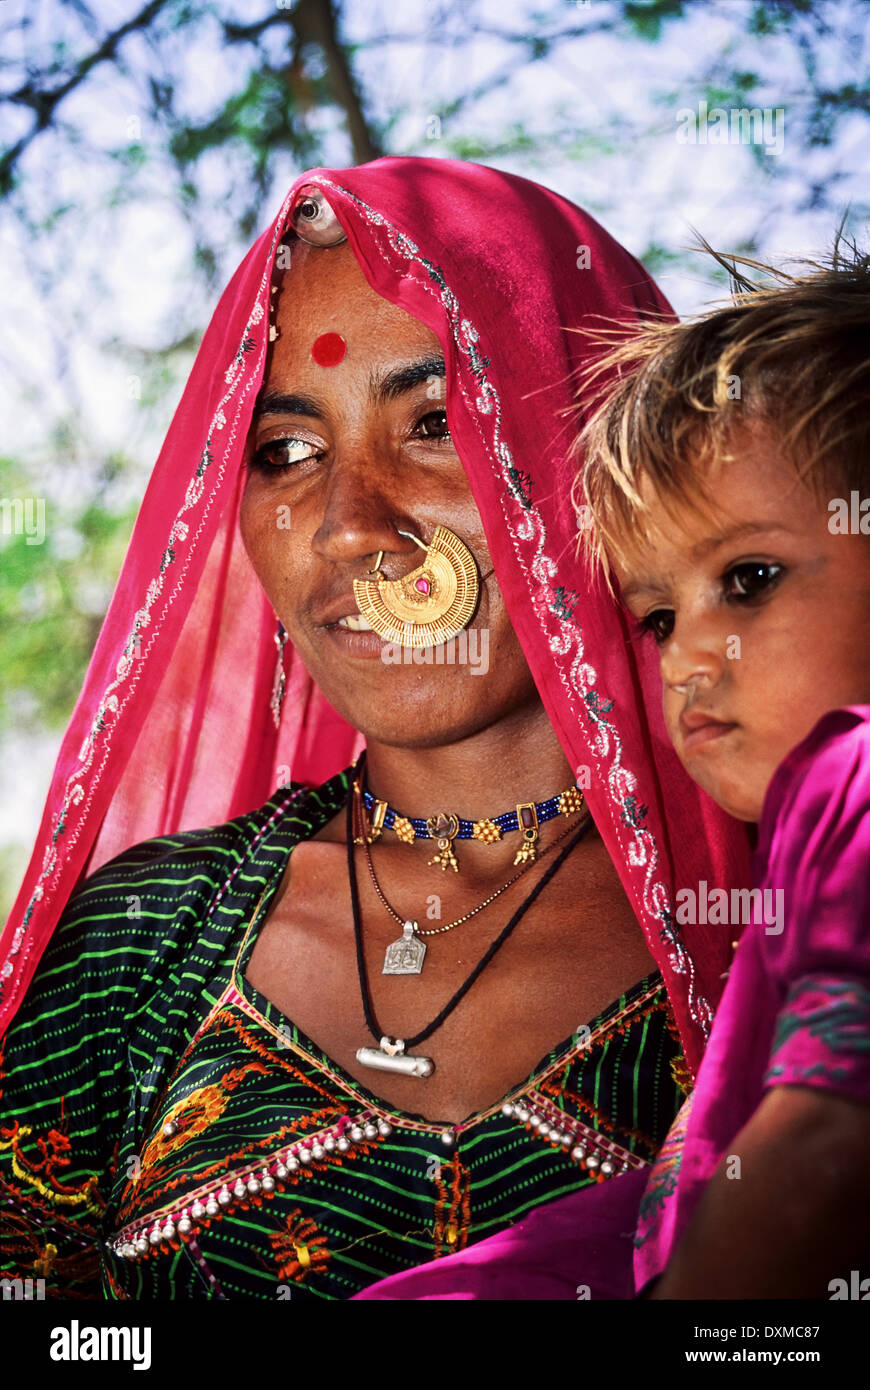 Indian woman wearing gold jewellery and pink headscarf carrying a small child in a village near Jodhpur, India Stock Photo